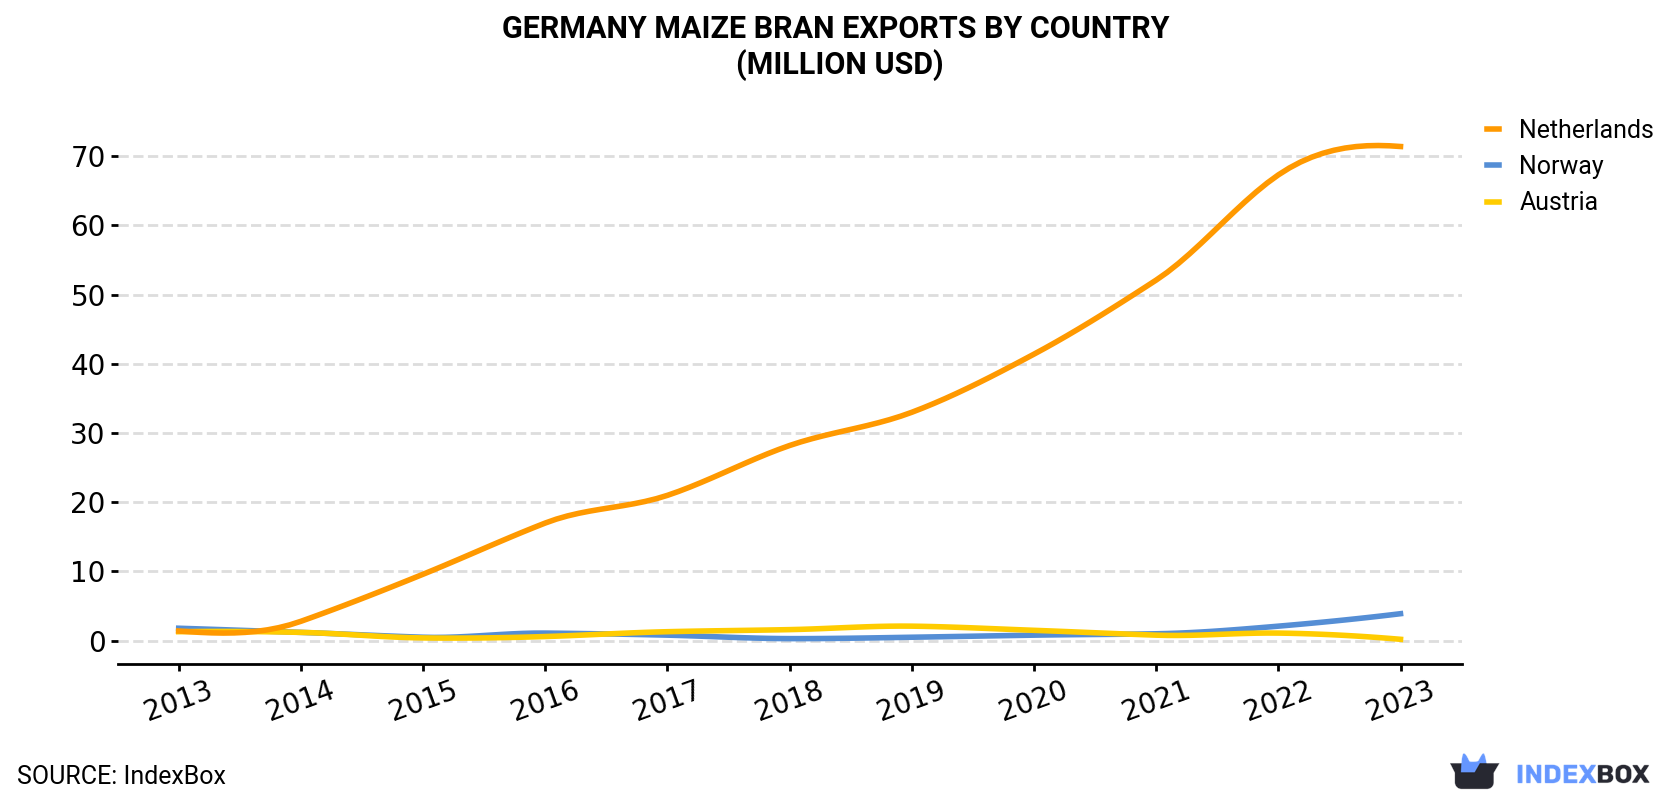 Germany Maize Bran Exports By Country (Million USD)